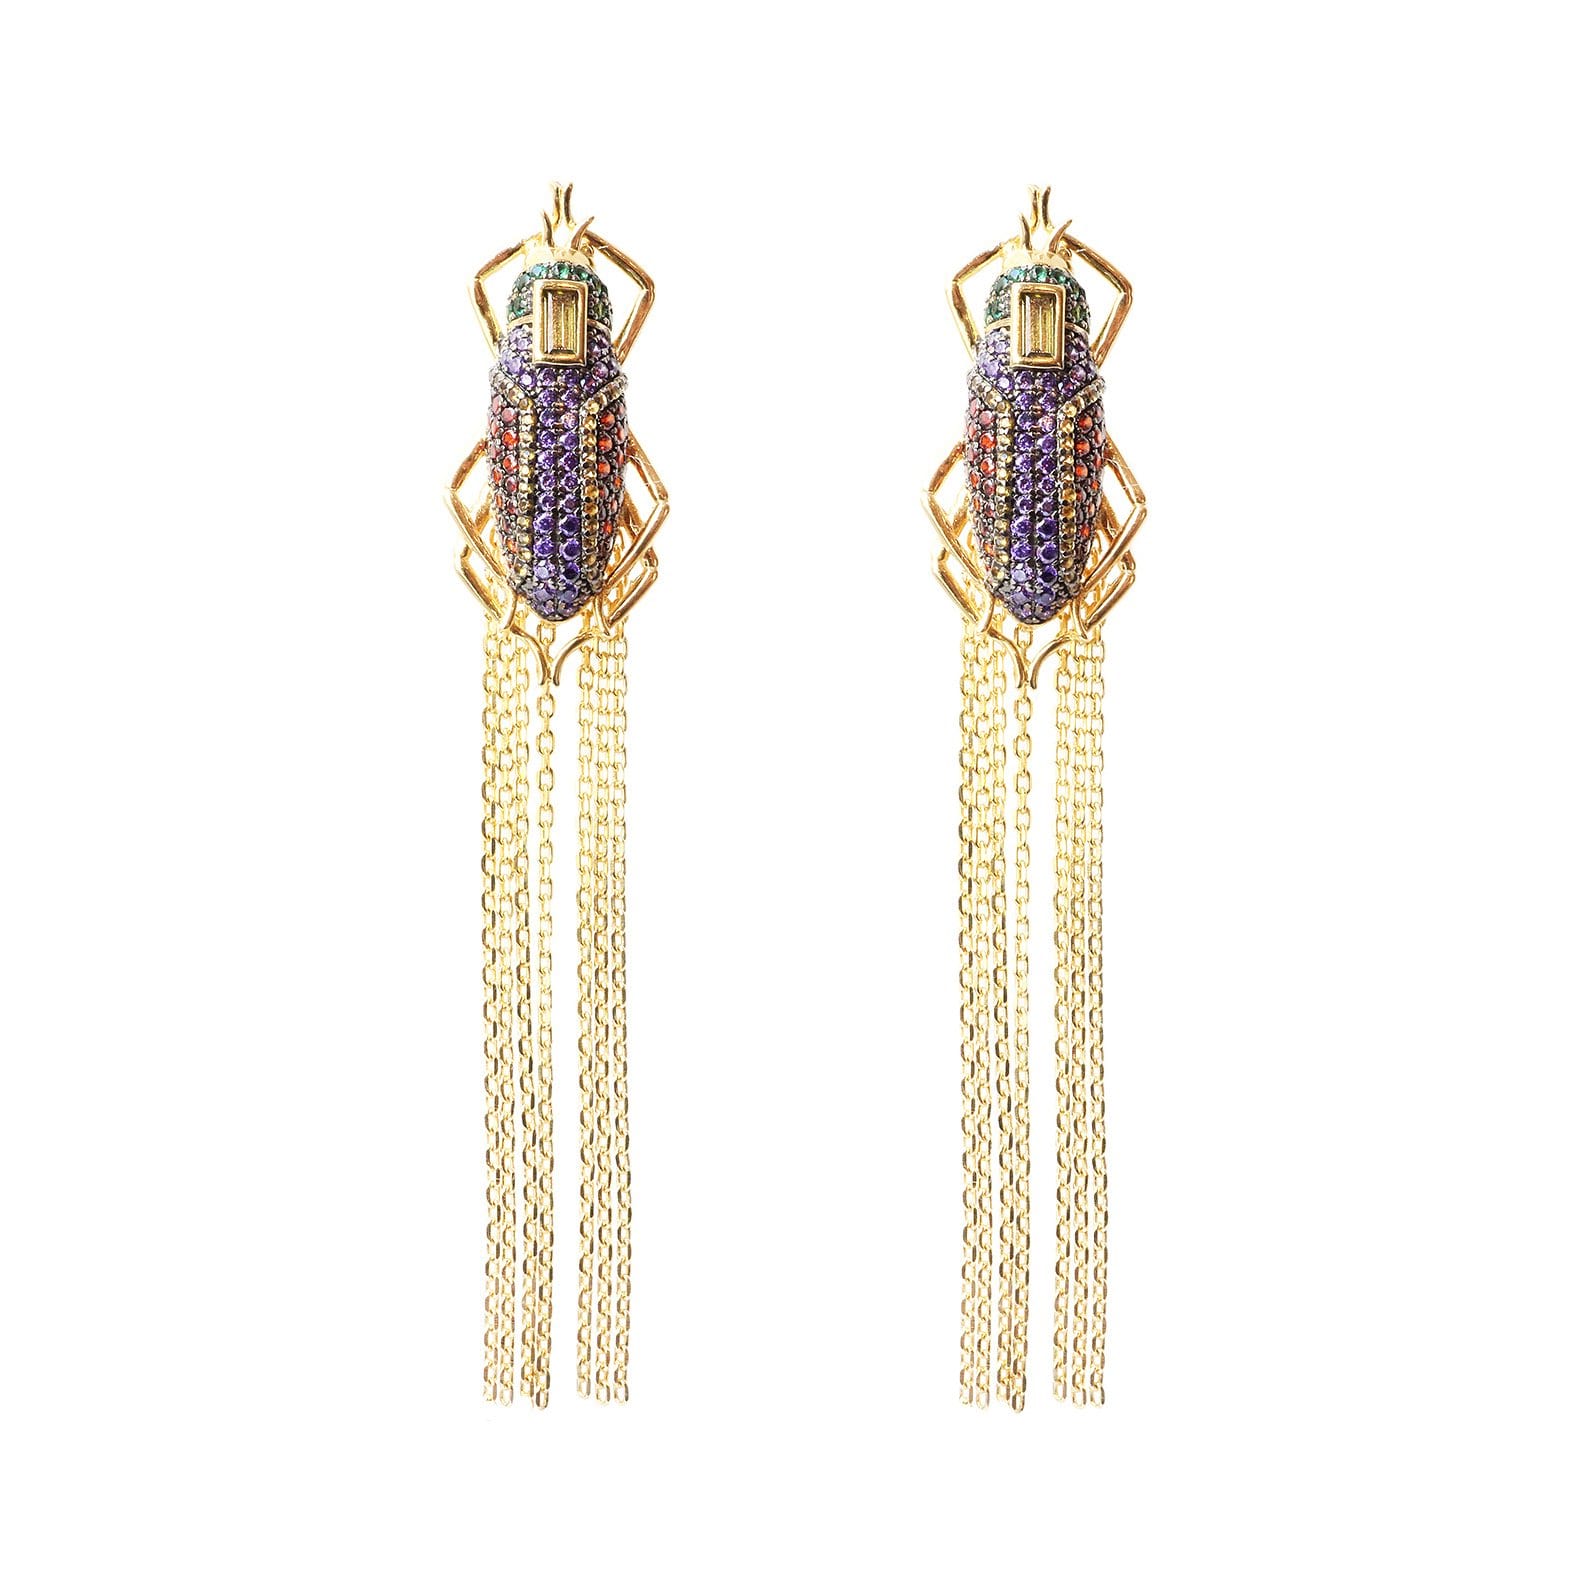 sliver gold plated beetles scarab earrings with colourful CUBIC ZIRCONIA gems stone and tassel from Hong Kong